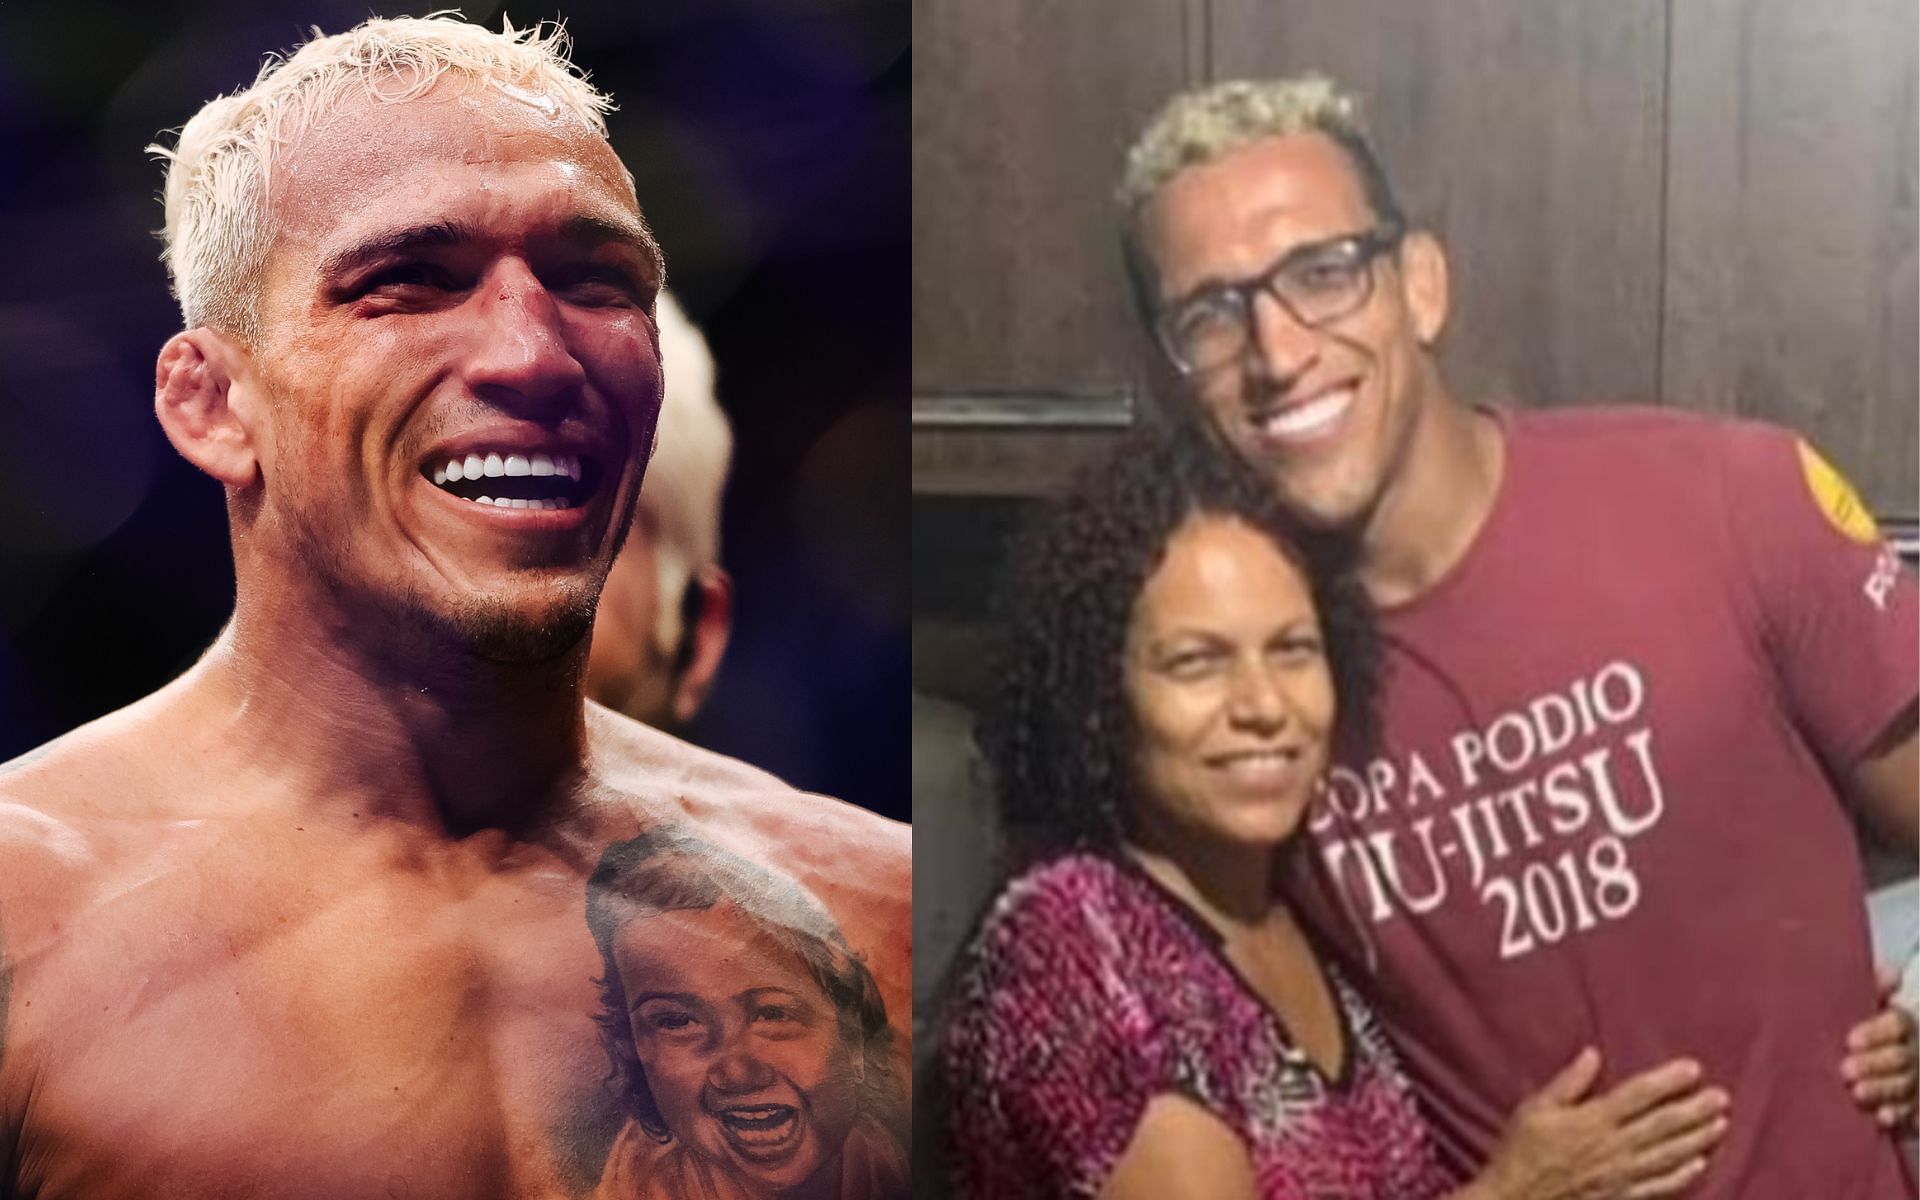 Charles Oliveira and his mother. [Image courtesy: picture with his mom from Instagram @charlesdobronxs]